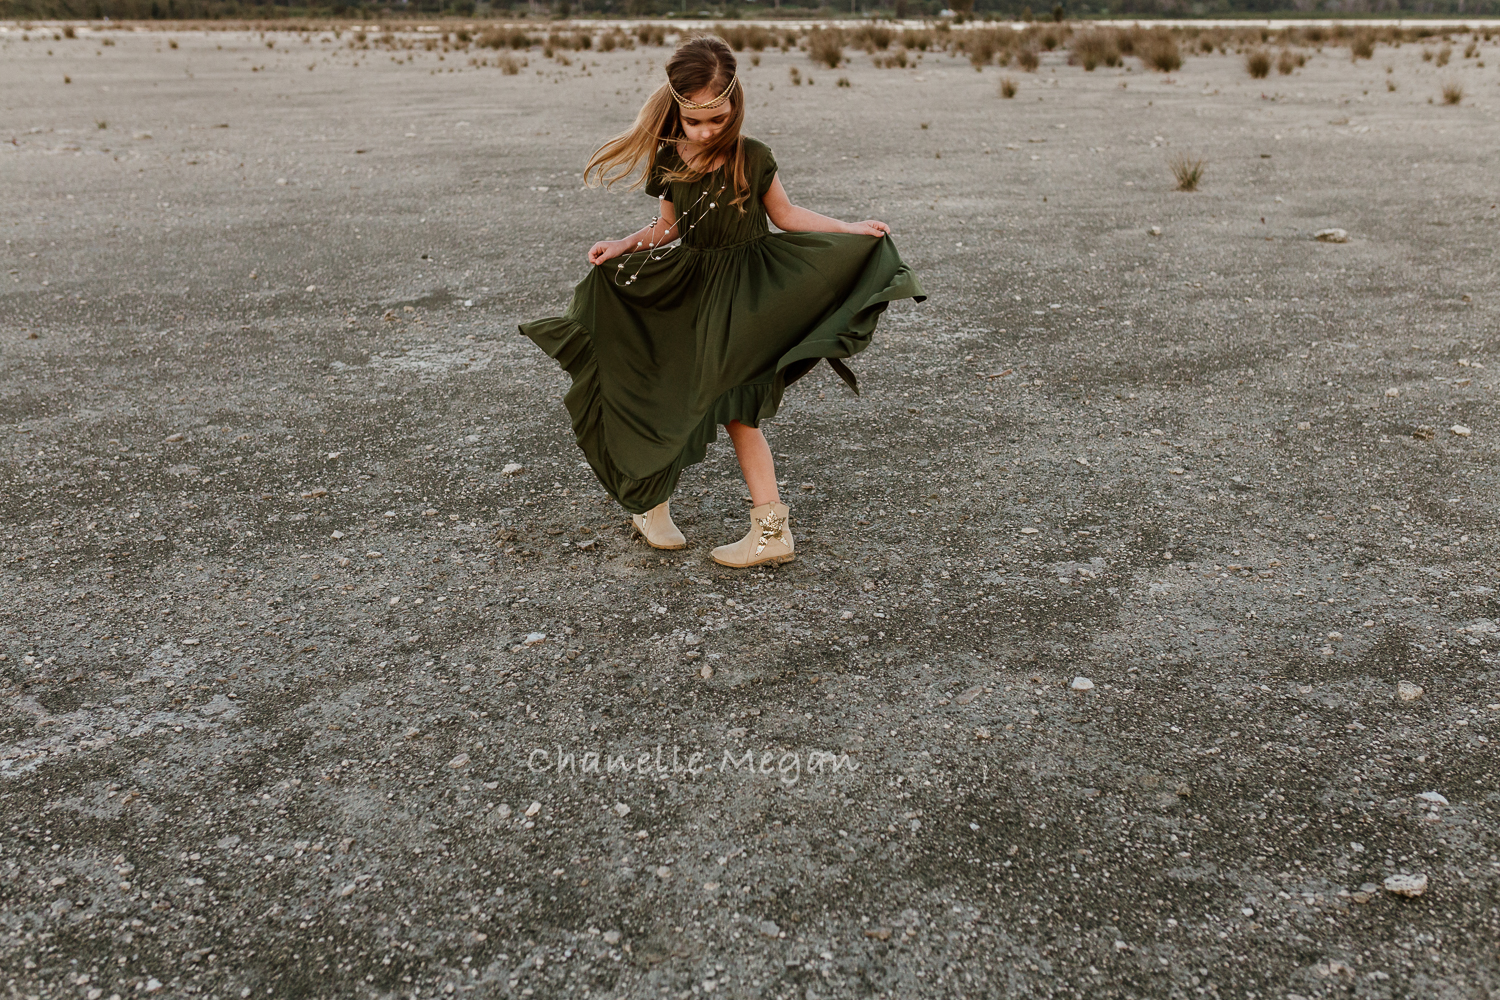 Chanelle Megan Photography engages with your kids to get them doing something while she photographs them